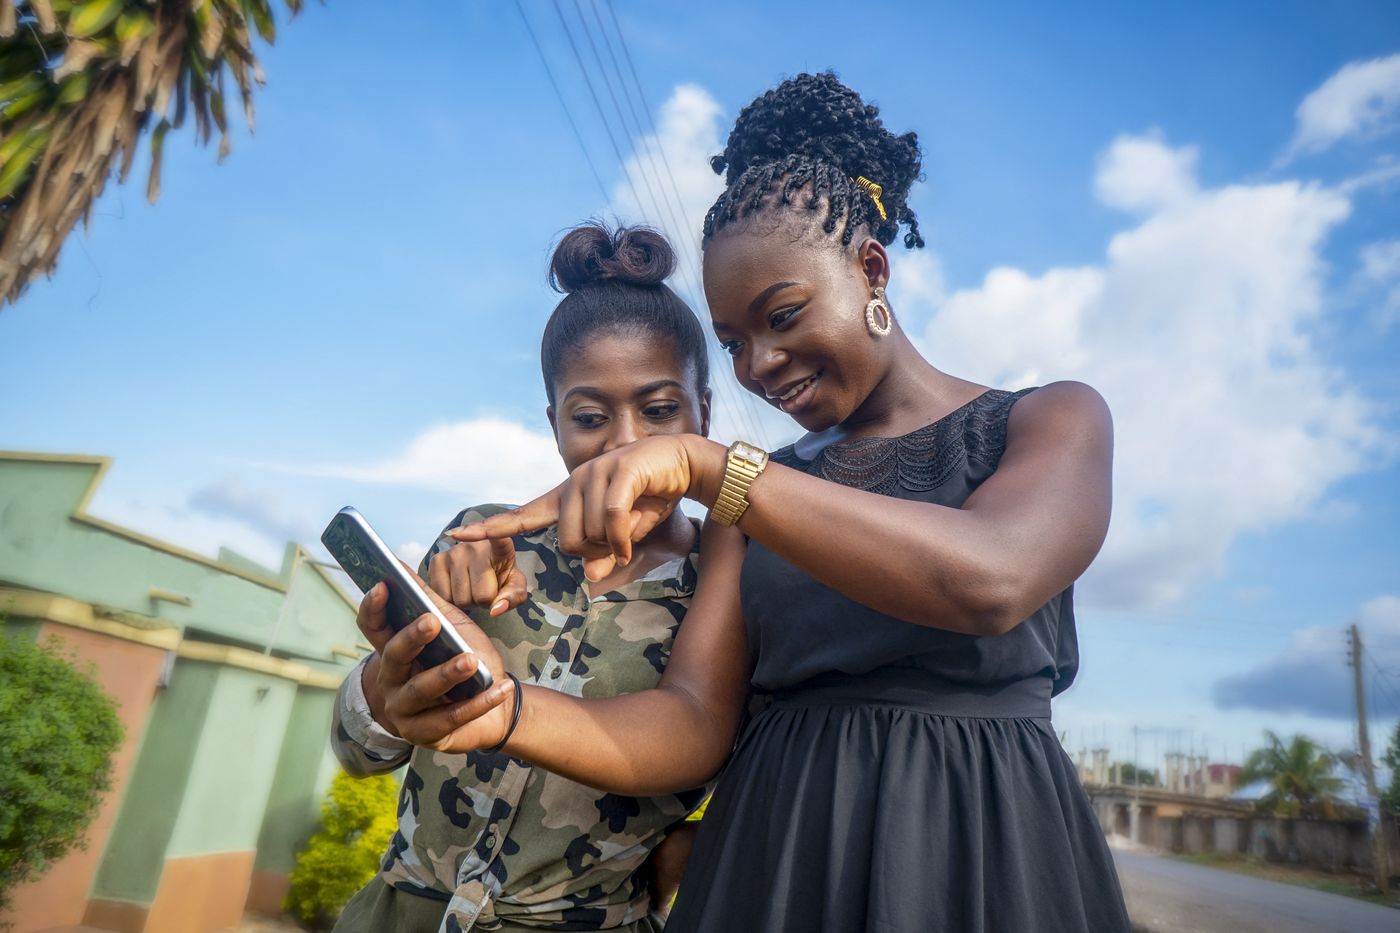 Ghana, 2021: Women looking at a smartphone. 